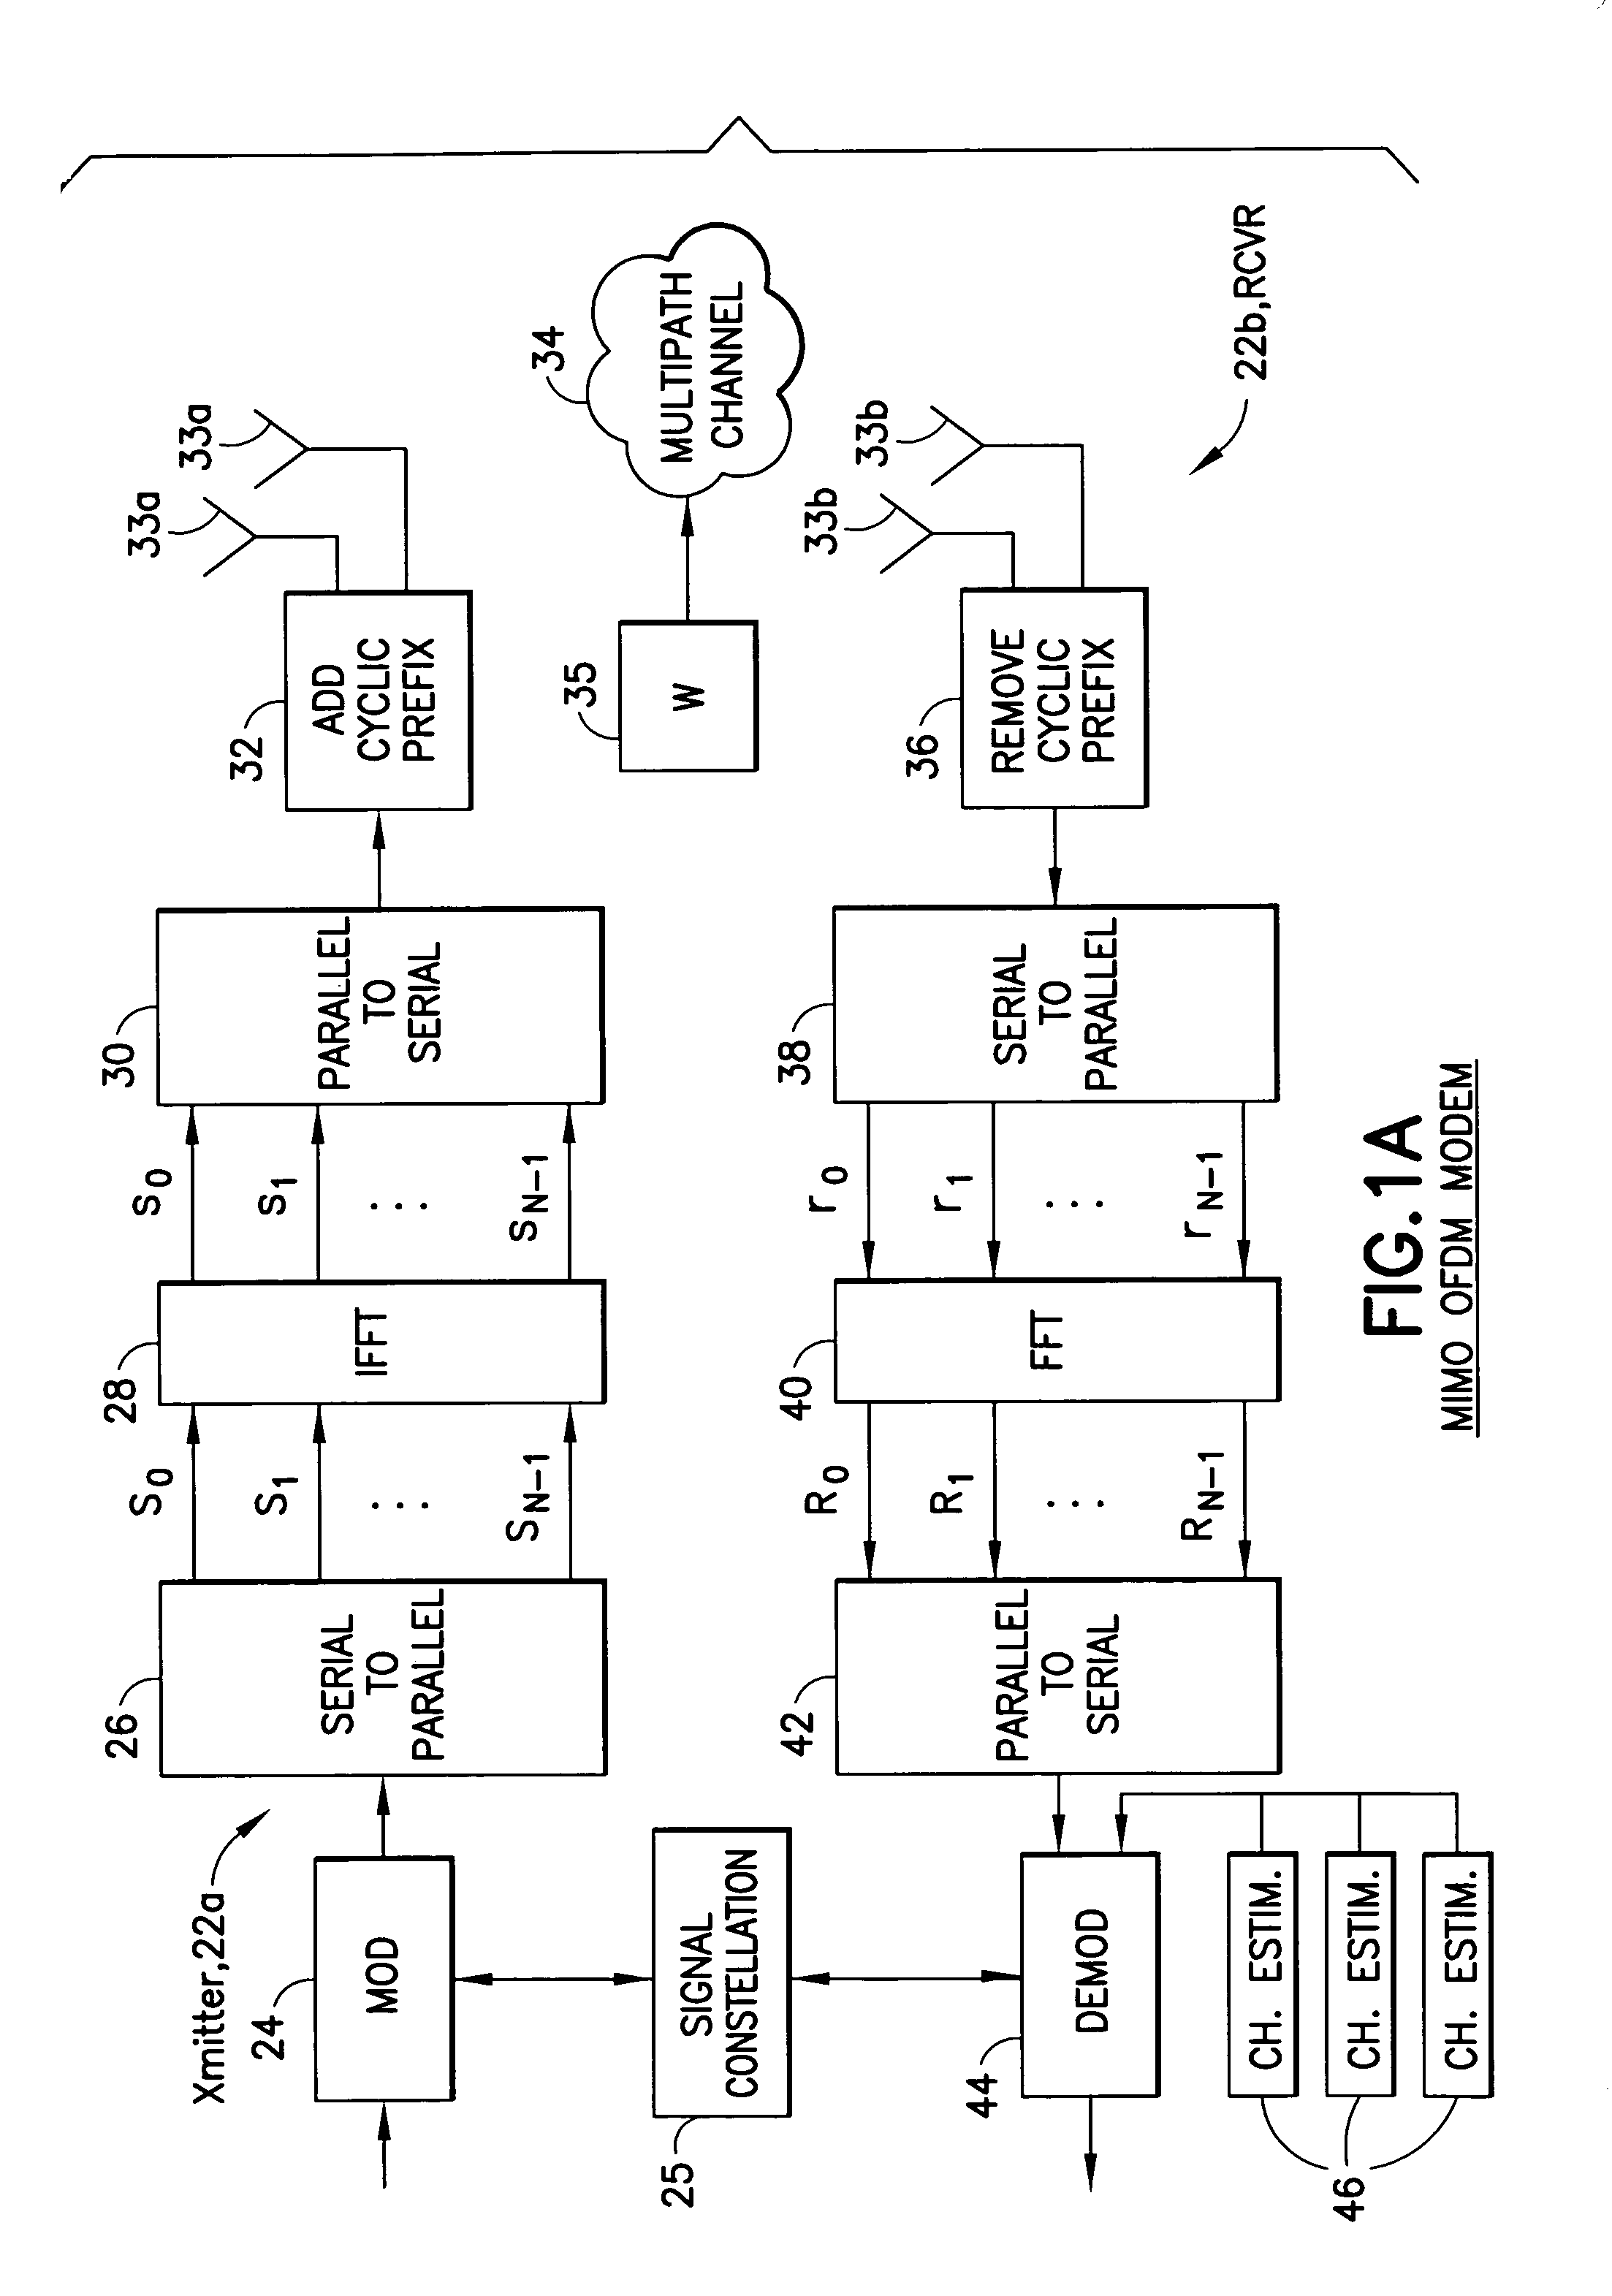 Multiple-antenna partially coherent constellations for multi-carrier systems